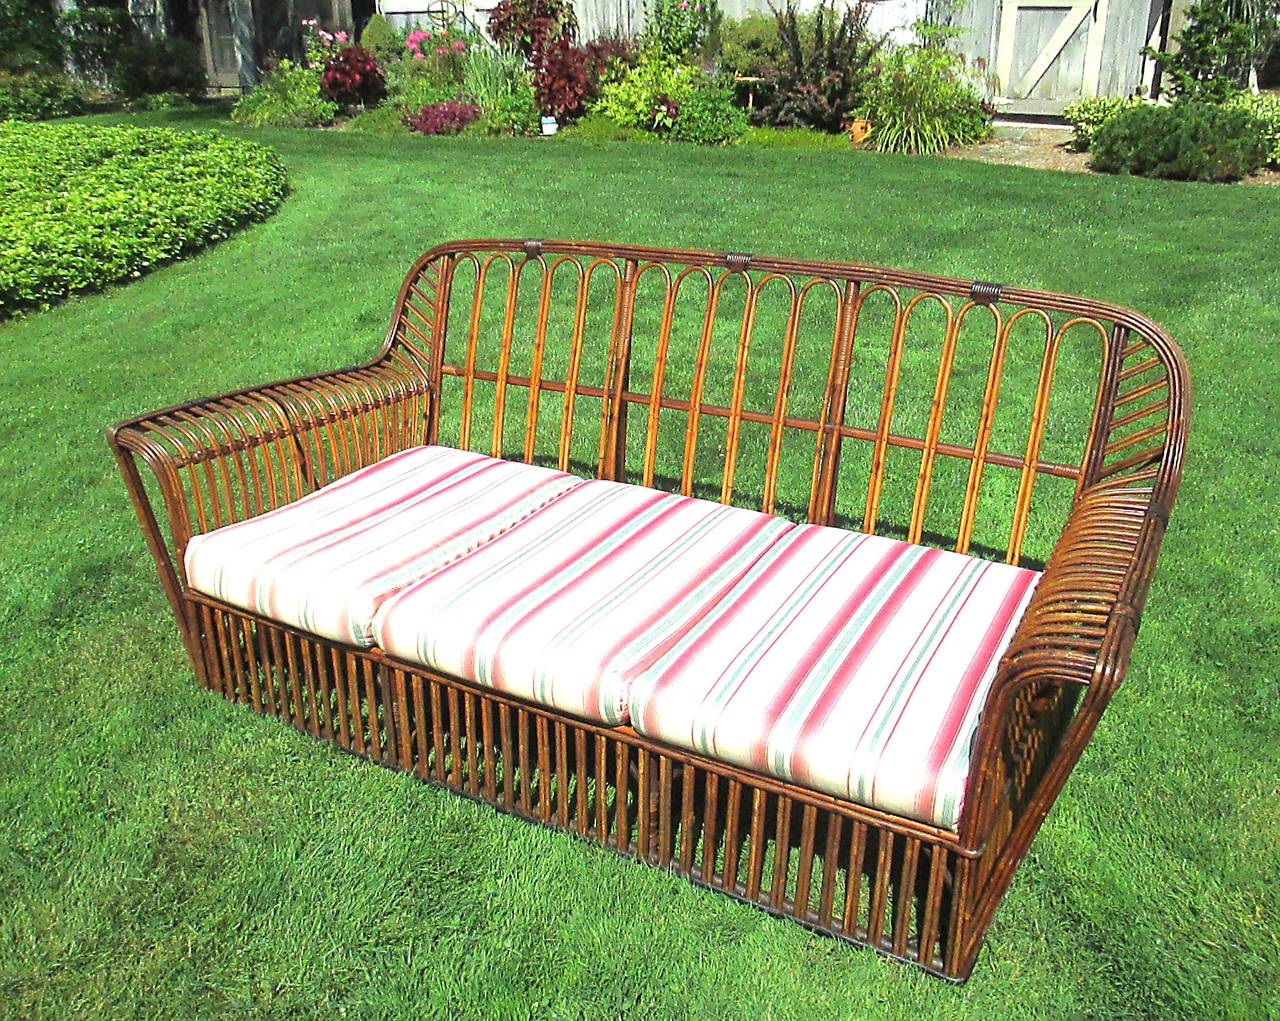 Stick wicker sofa in natural stained finish with cinnamon and black painted trim. Rounded back form with gently arched armrests. Paired vertical rattan strands to front and sides, looped strands to back. Newer foam seat and back cushions.